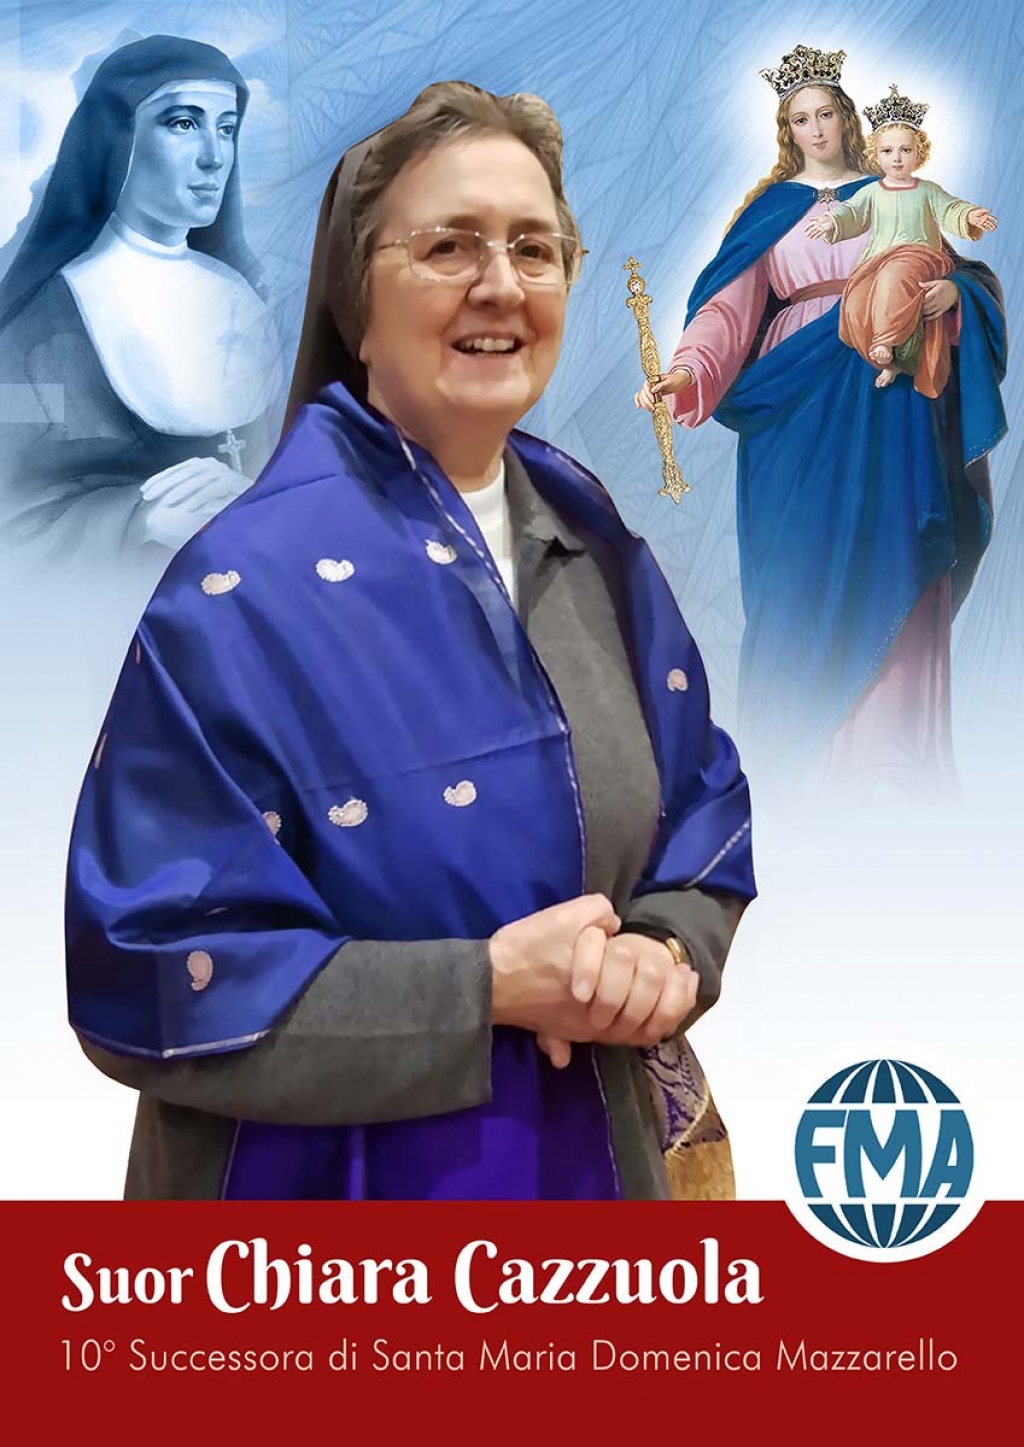 Sr Chiara Cazzuola FMA elected New Mother General of Daughters of Mary Help of Christians